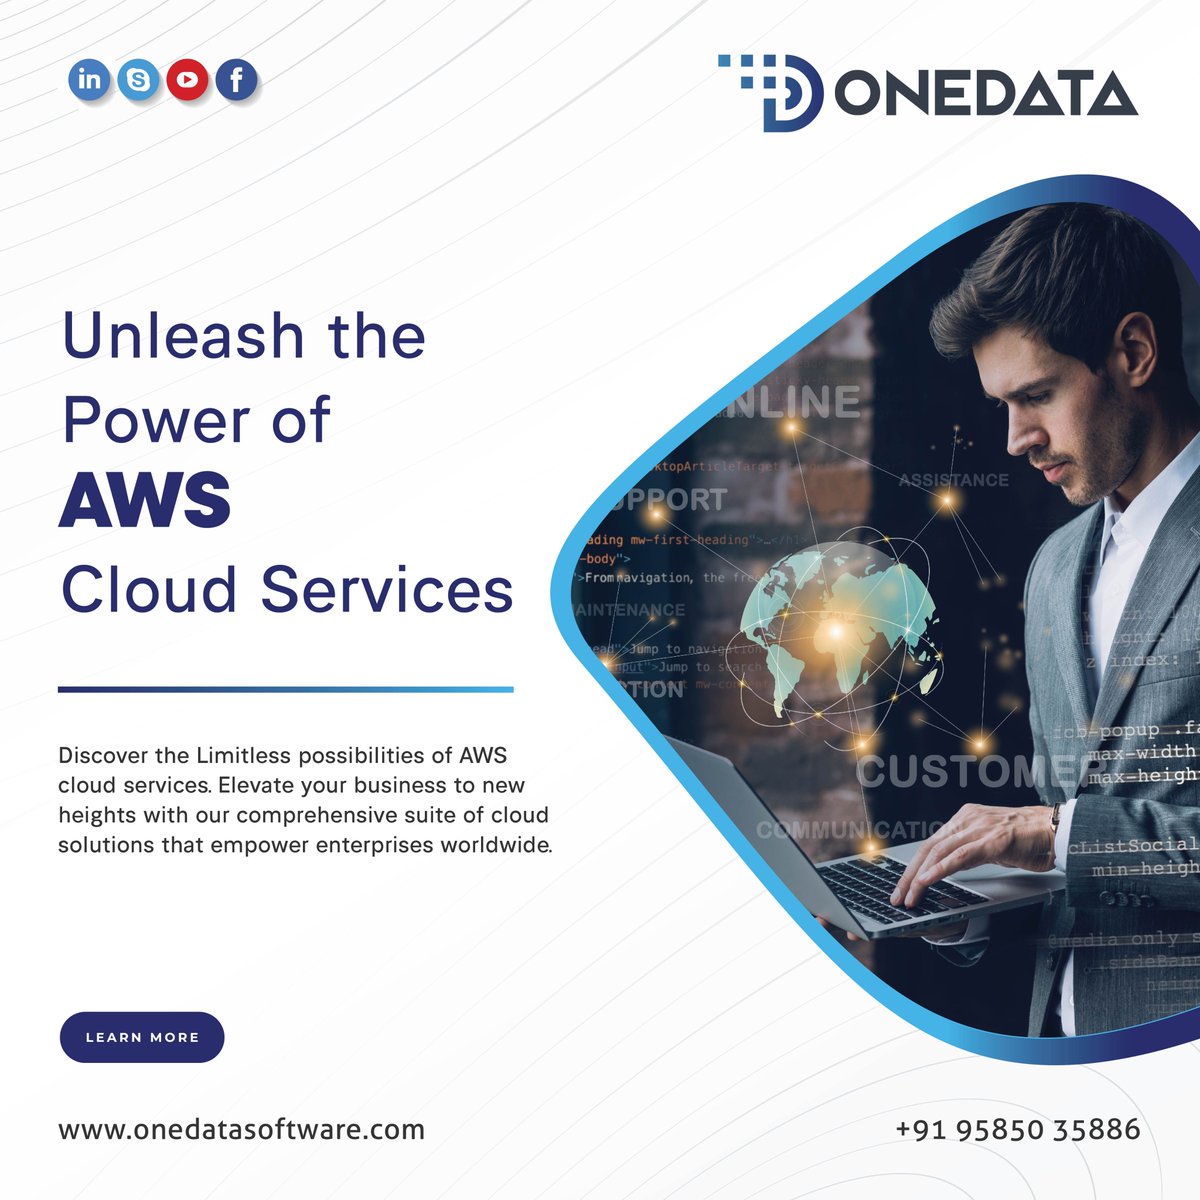 🚀 Unleash the Power of AWS Cloud Services 🌐

Are you ready to elevate your business to new heights? 📈 Discover the limitless possibilities of AWS Cloud Services! 🔥
Let's transform your business together.👍
#AWS #BusinessSuccess #cloudsecurity #CloudComputing #Amazon #AI